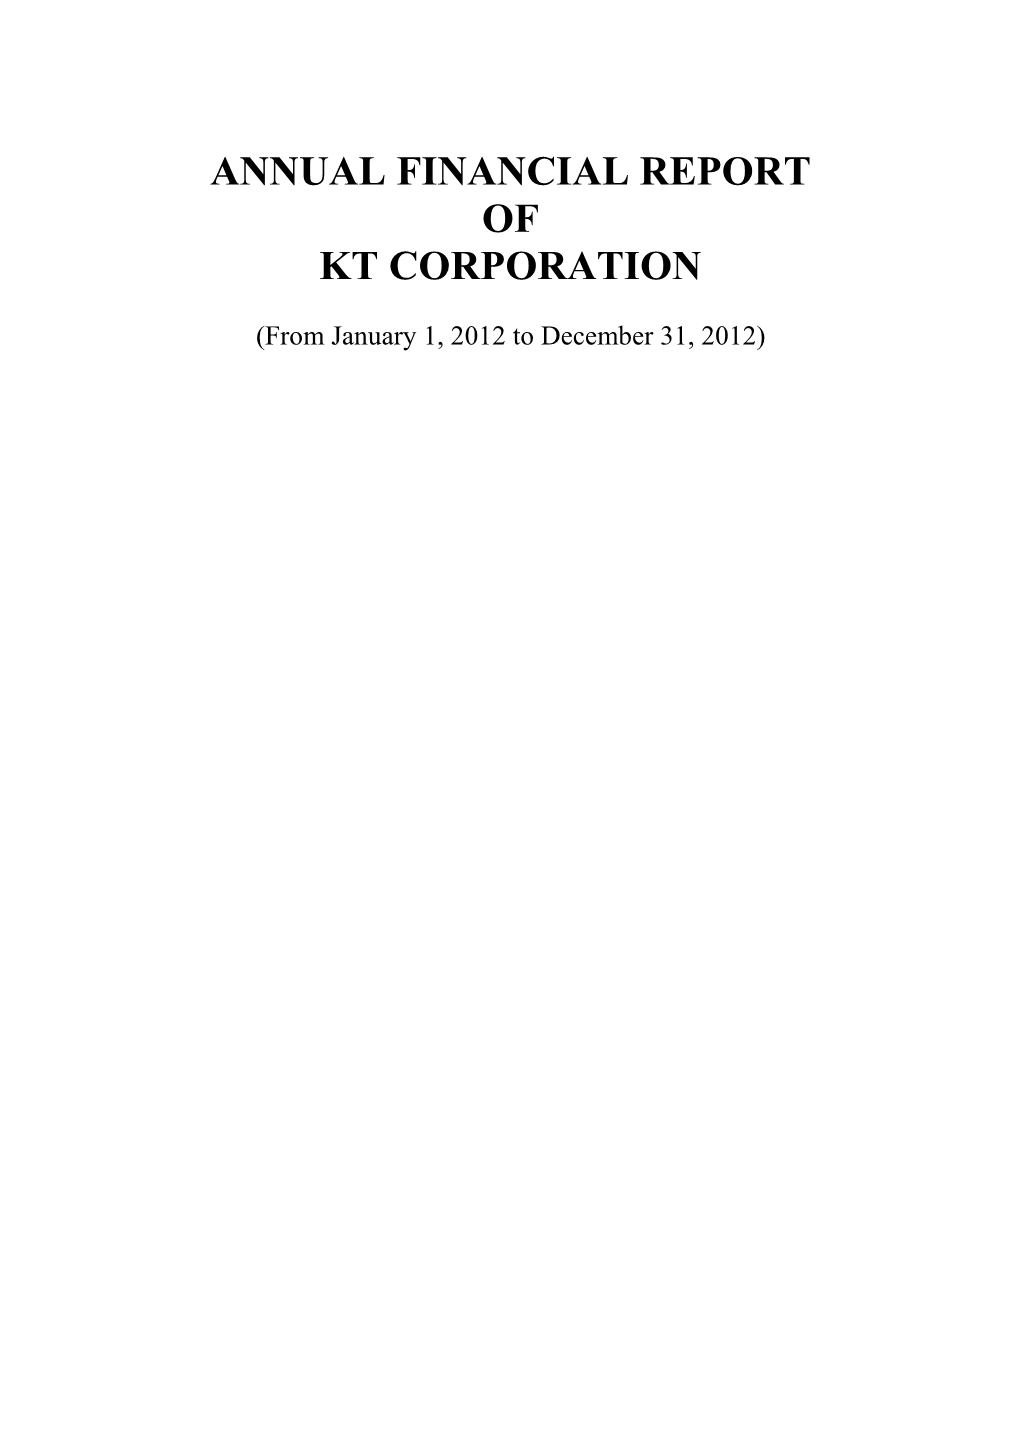 Annual Financial Report of Kt Corporation